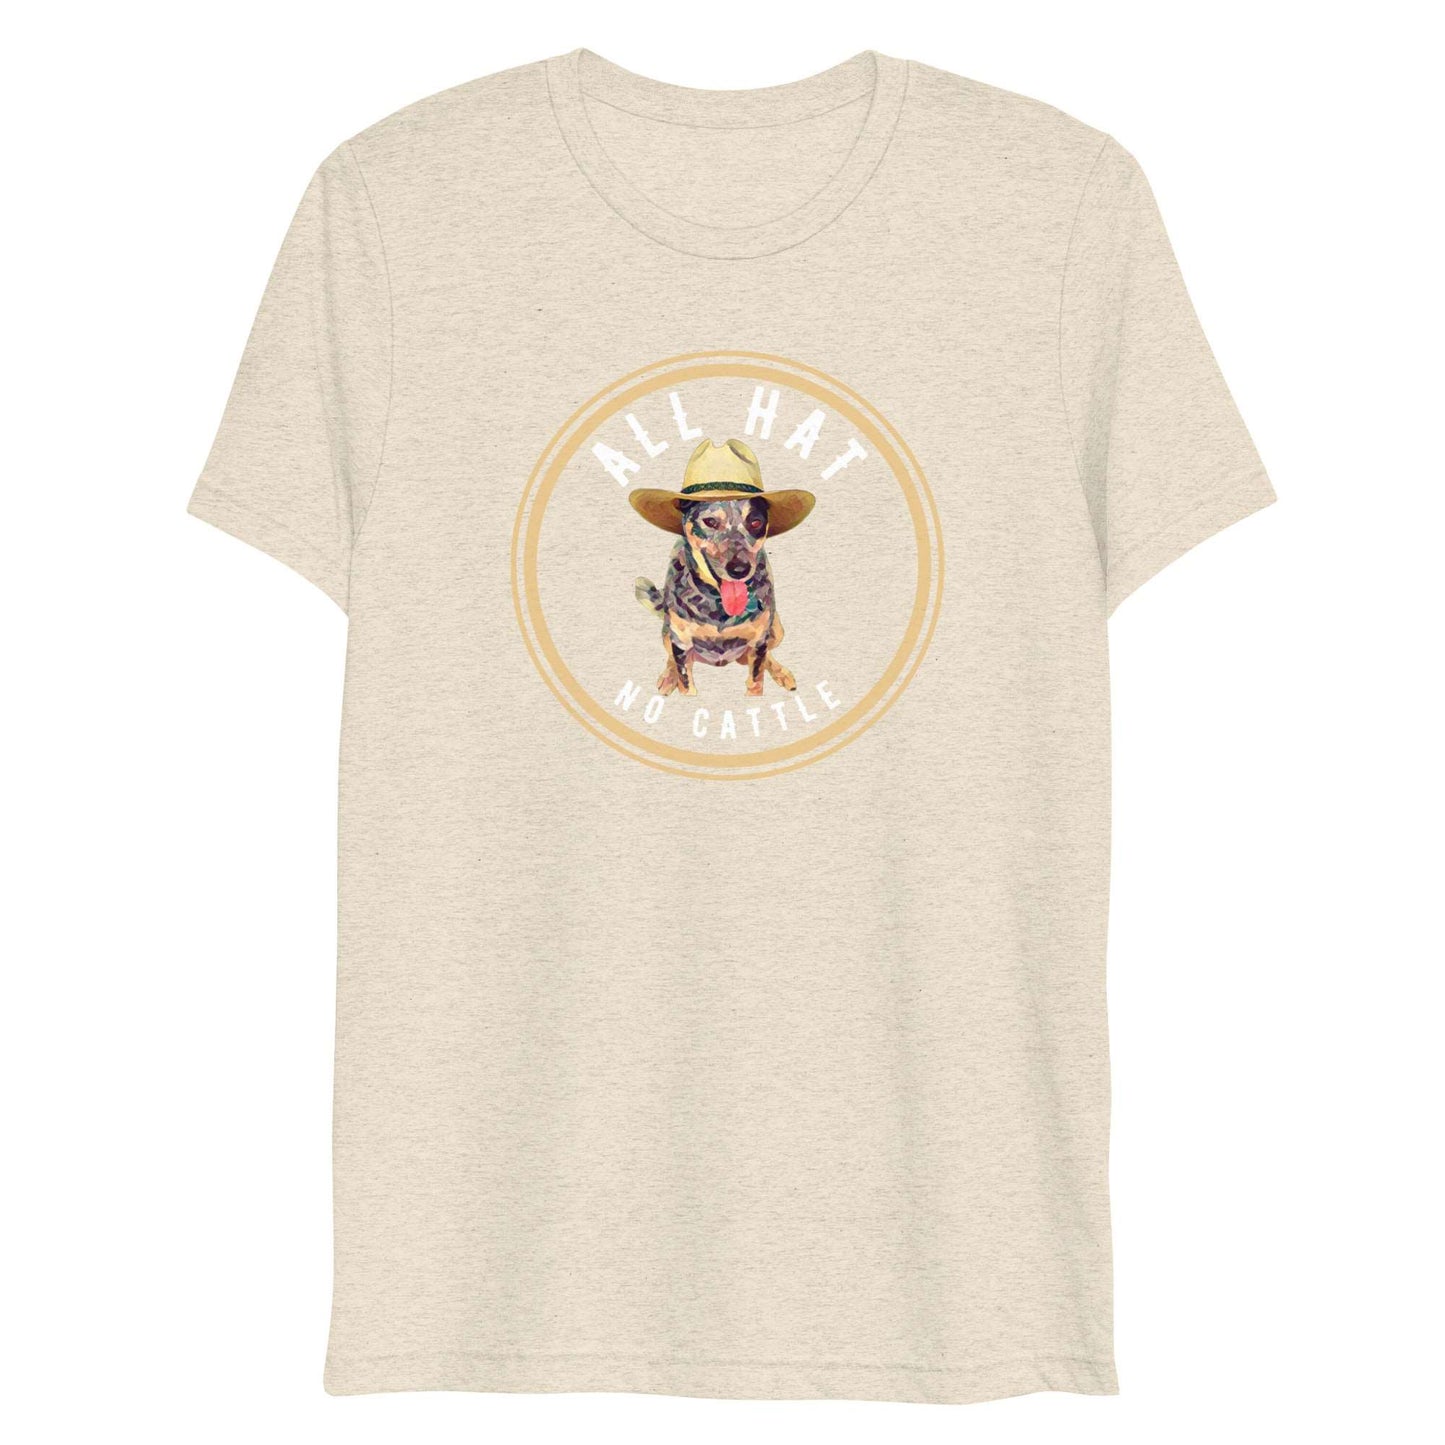 All Hat No Cattle t-shirt